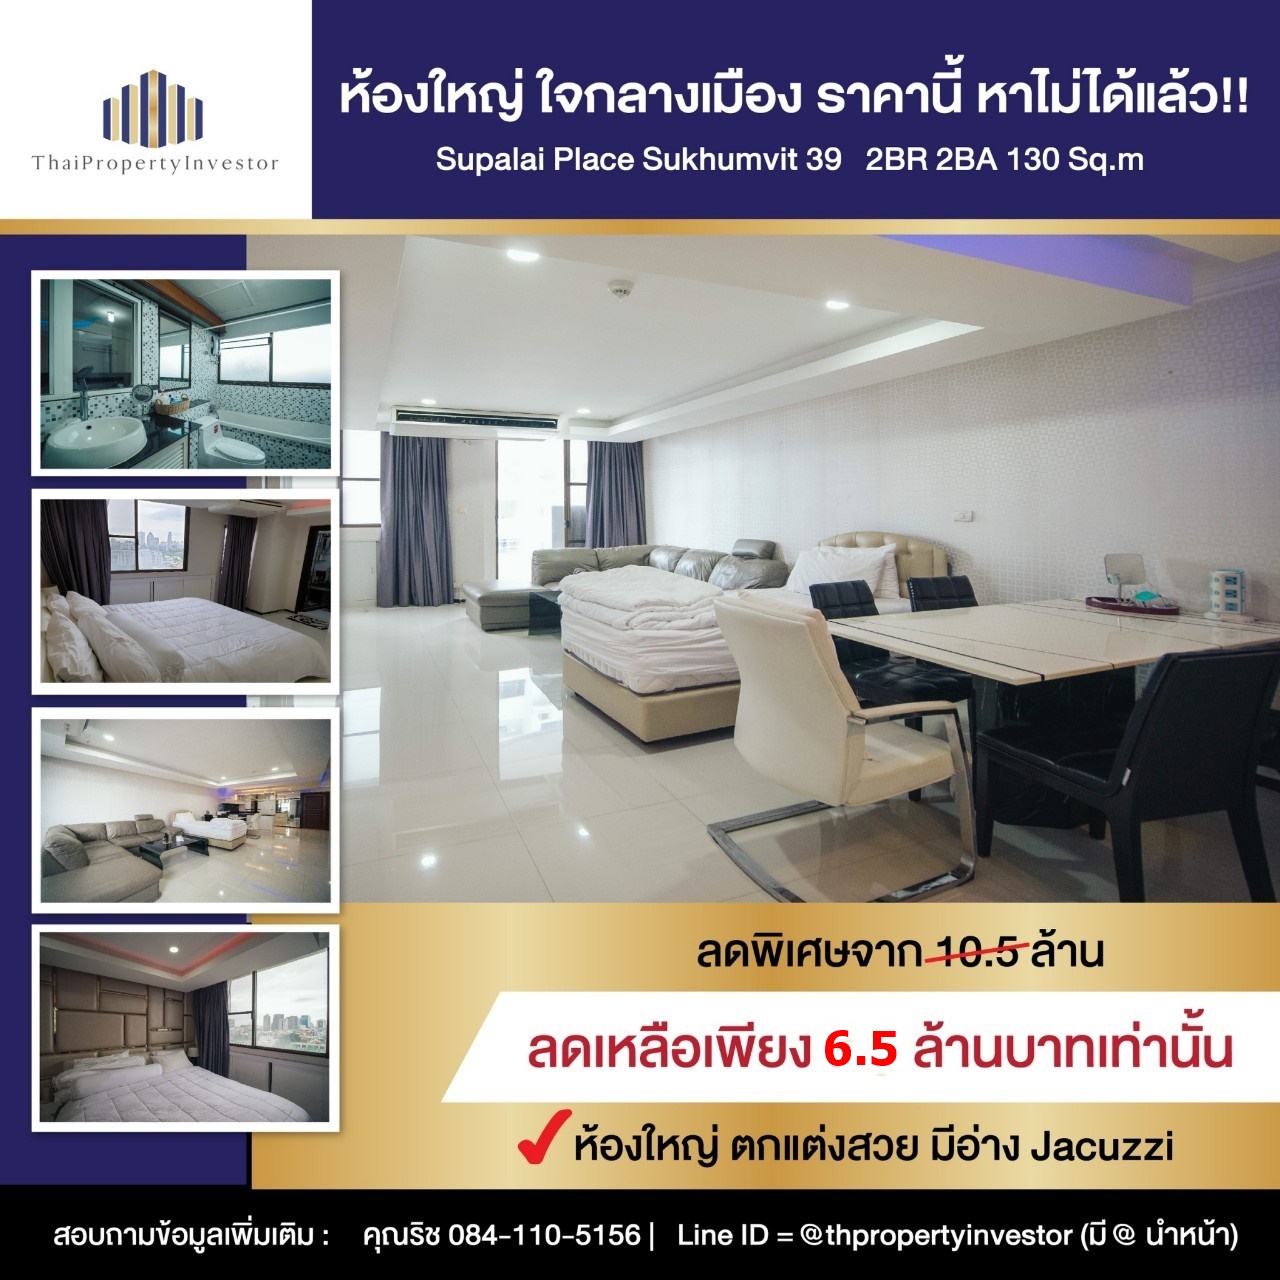 Best Price in the Project!! 110 Sq.m Room for SALE at Supalai Place Sukhumvit 39 Beautiful View!!